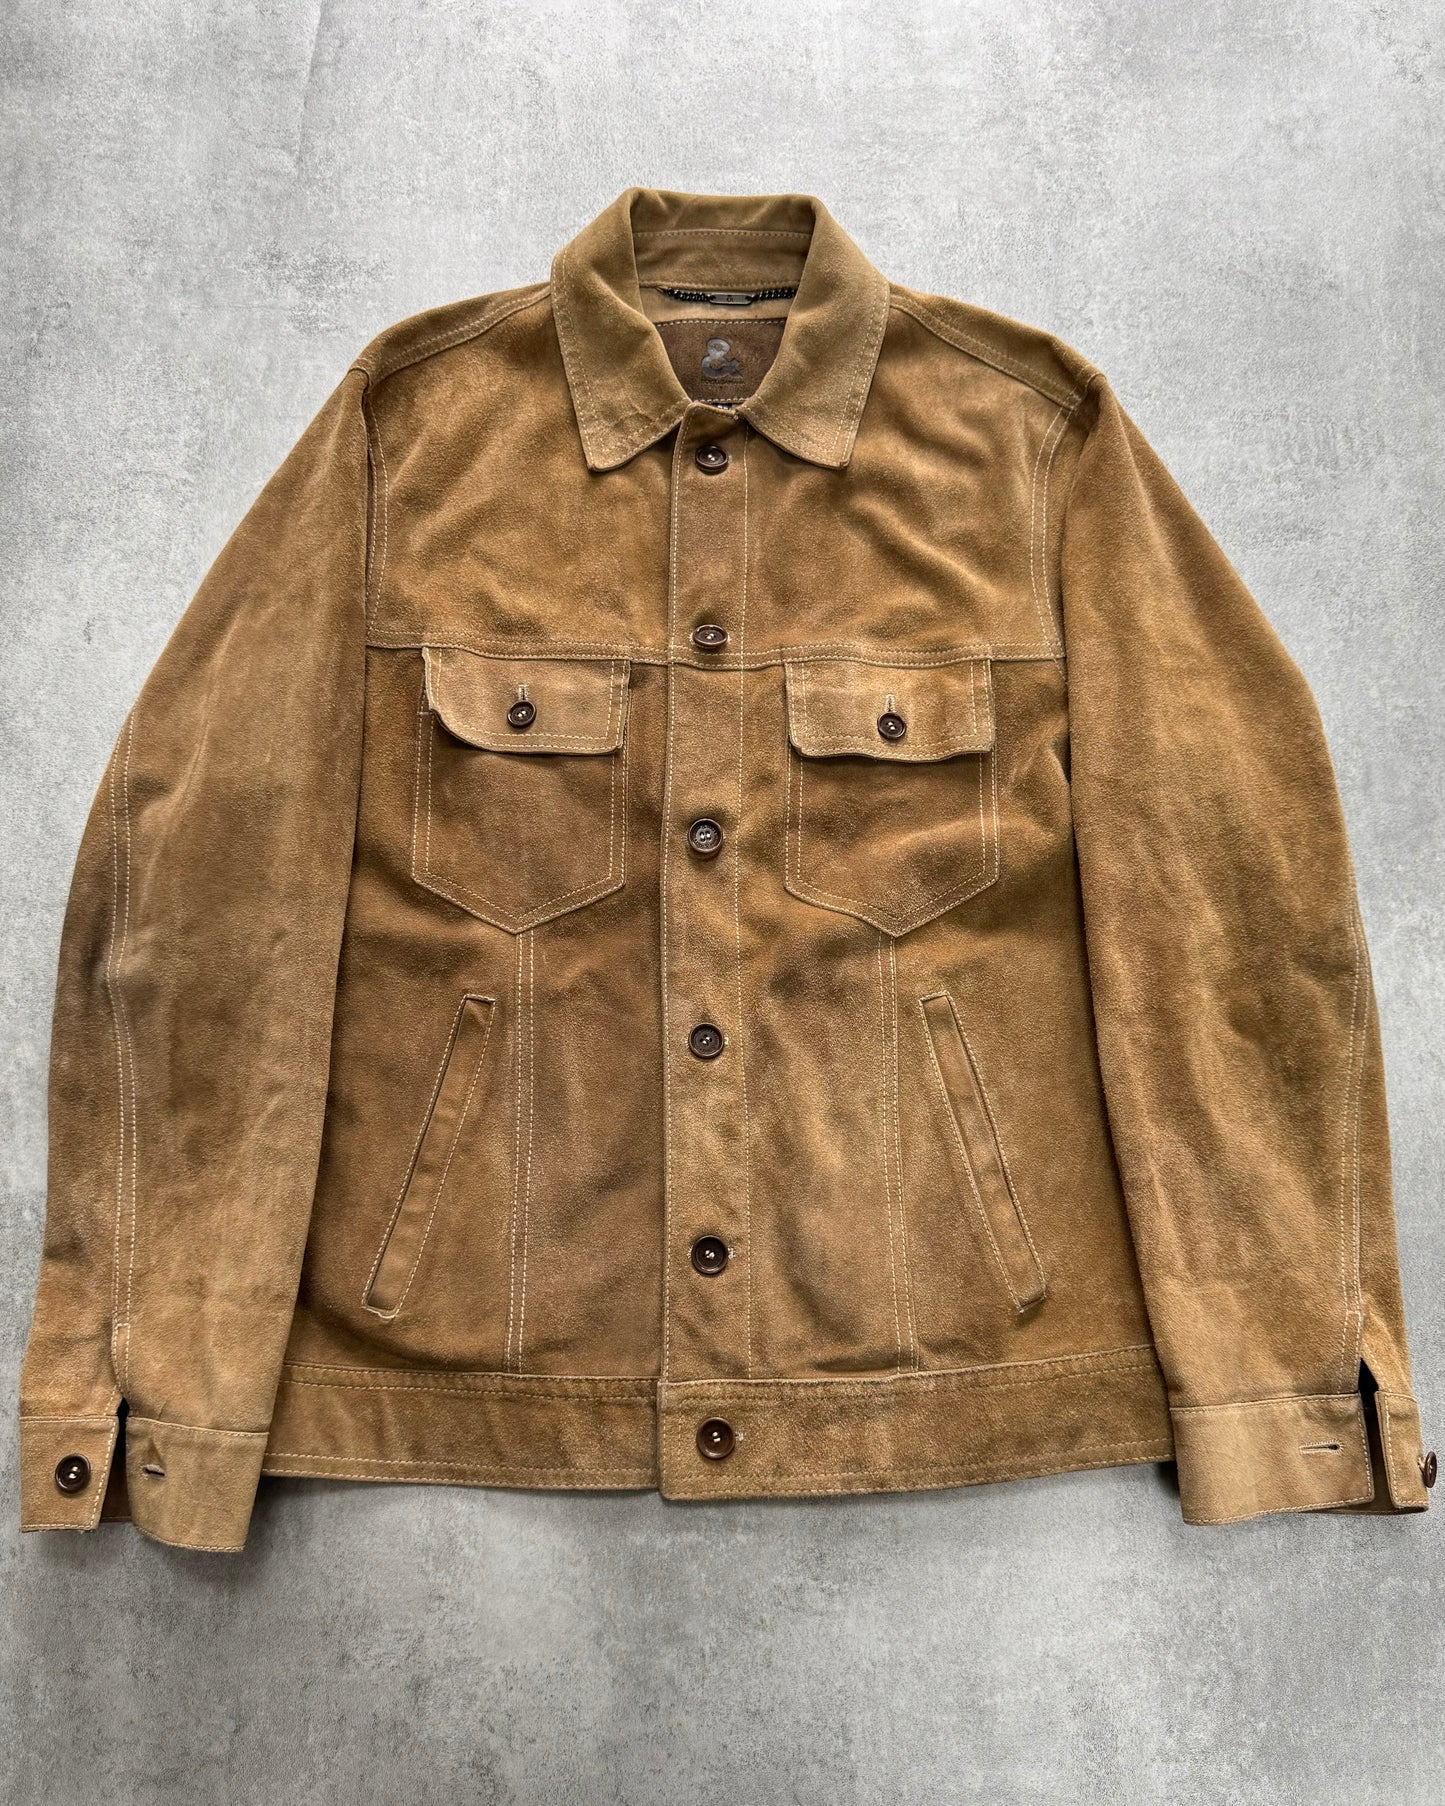 Dolce & Gabbana Suede Leather Jacket (M)